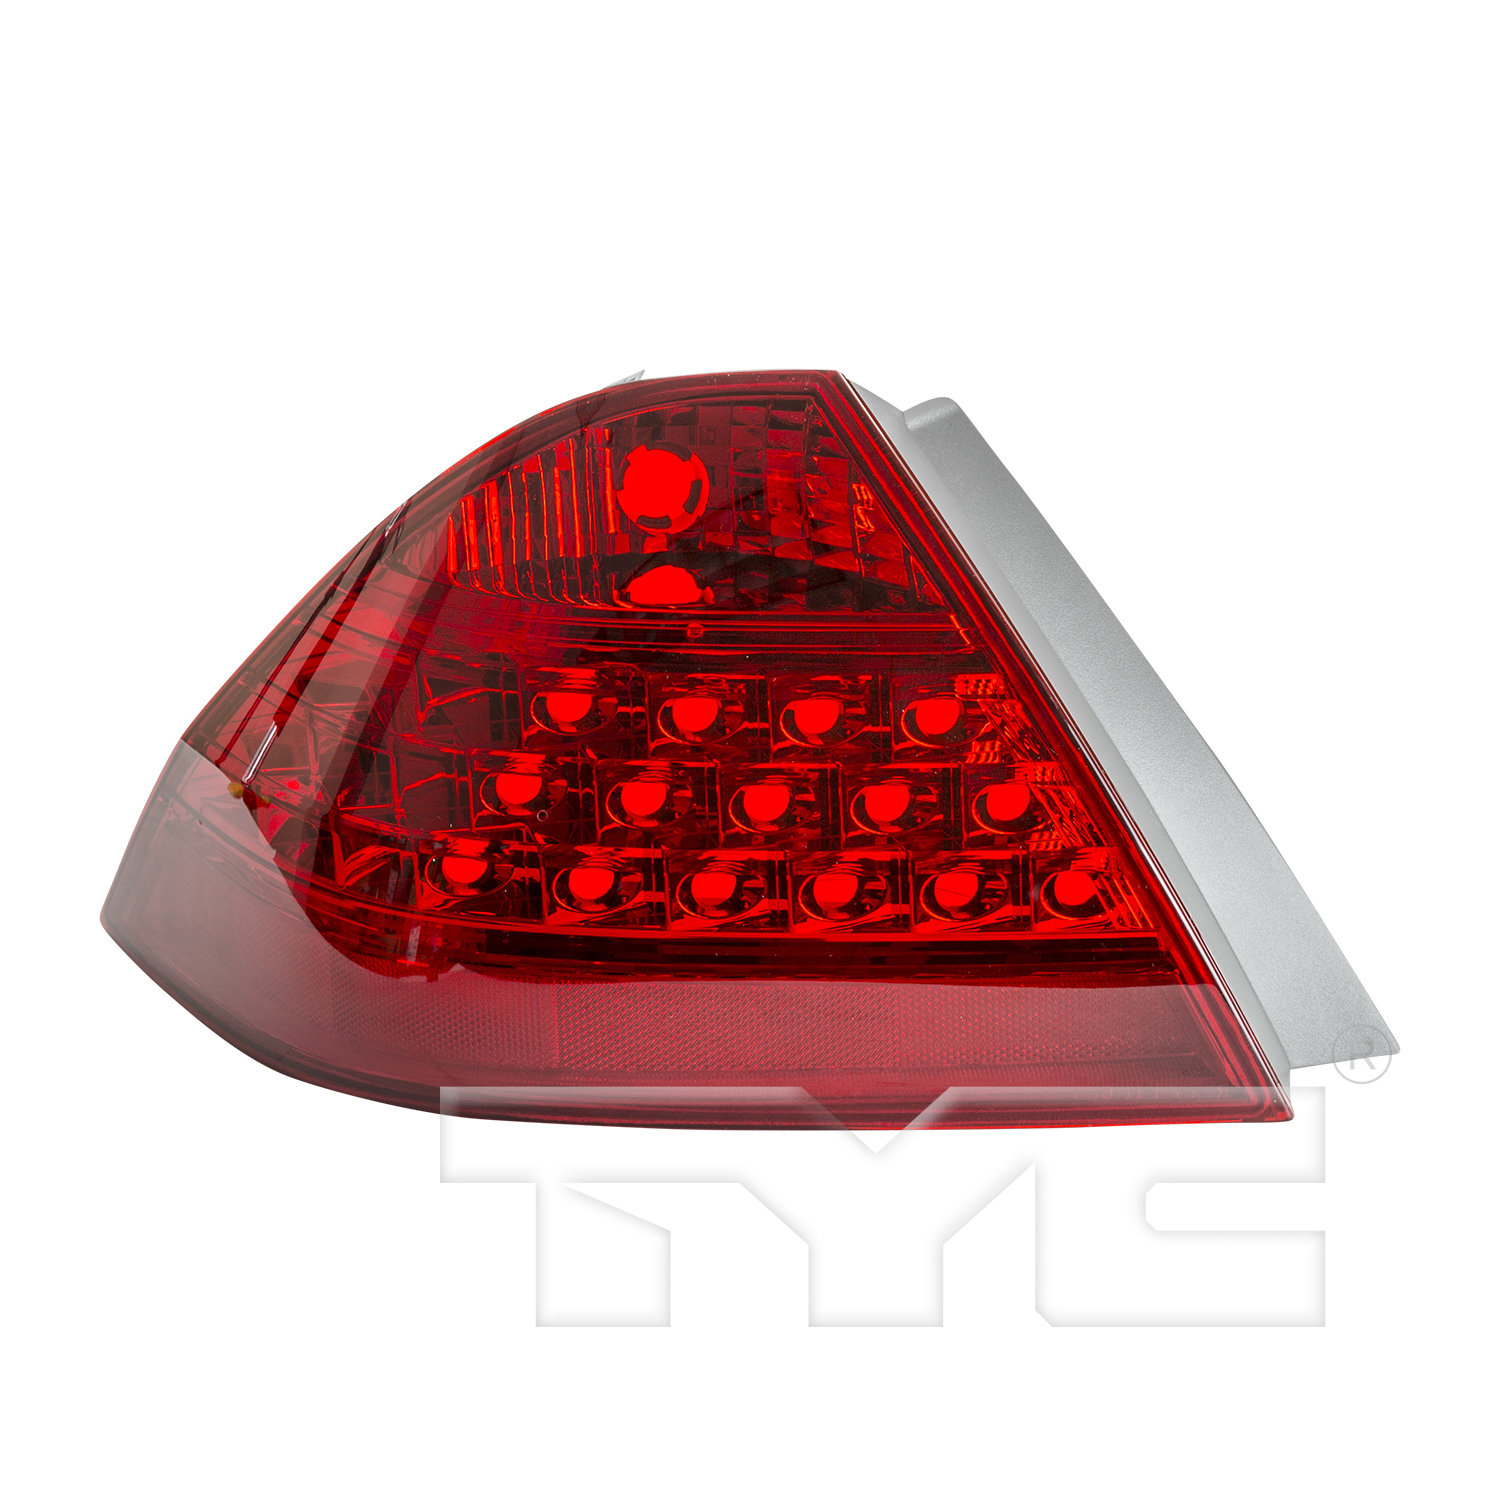 Aftermarket TAILLIGHTS for HONDA - ACCORD, ACCORD,06-07,LT Taillamp lens/housing